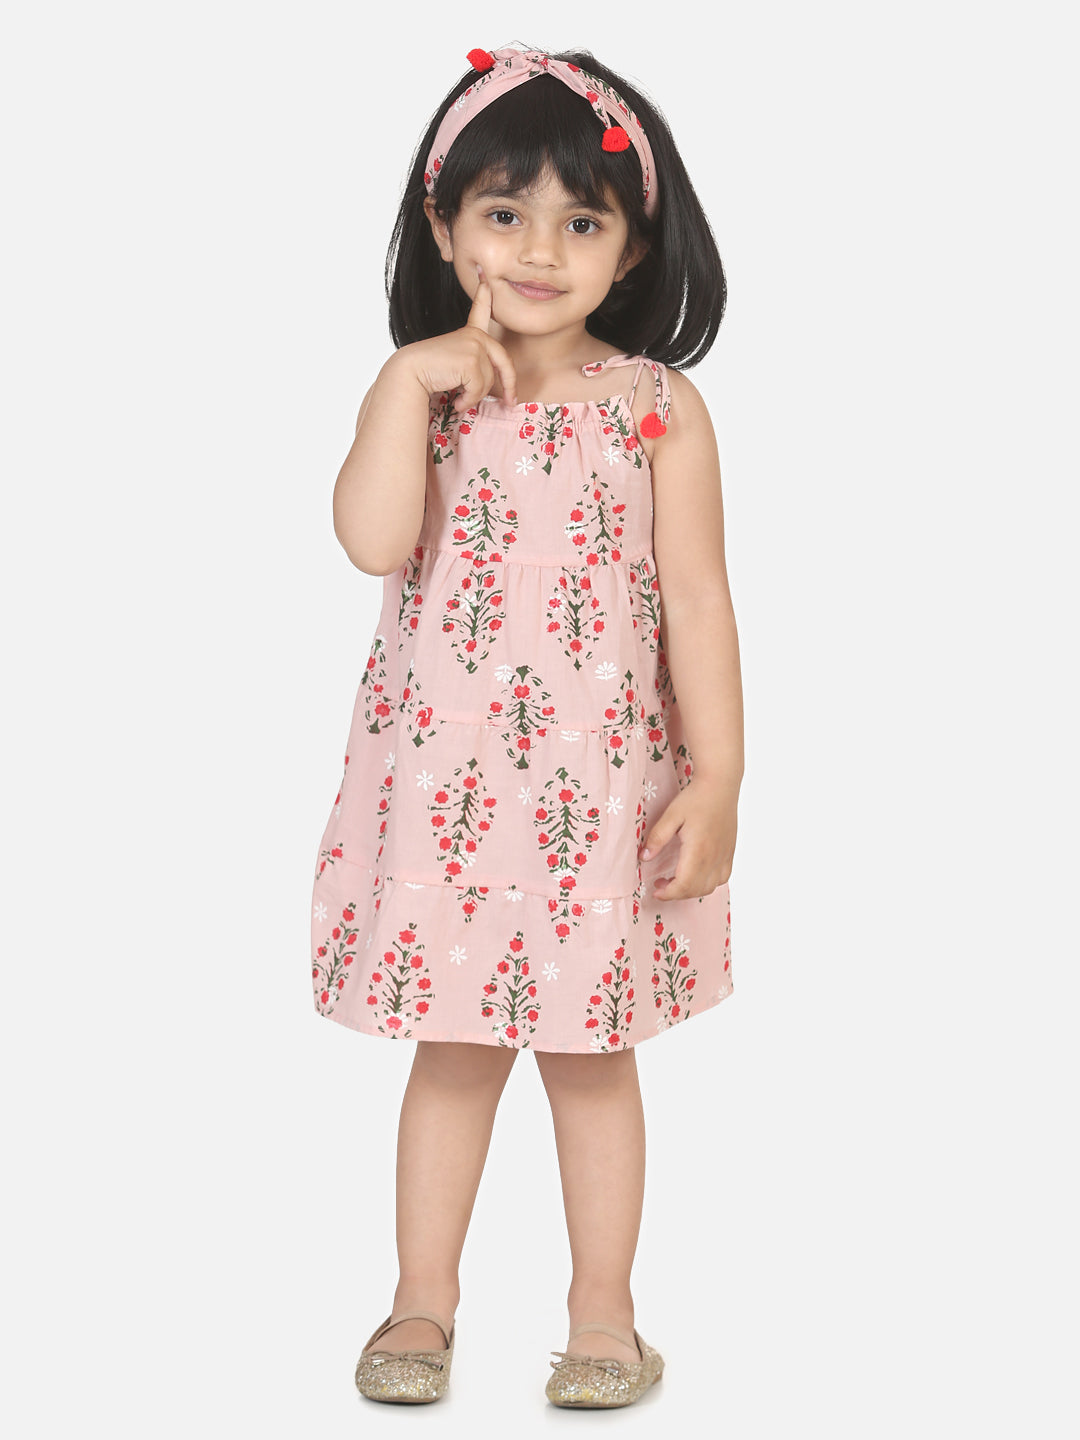 BownBee Block Print Tier Cotton Frock with Headband - Pink